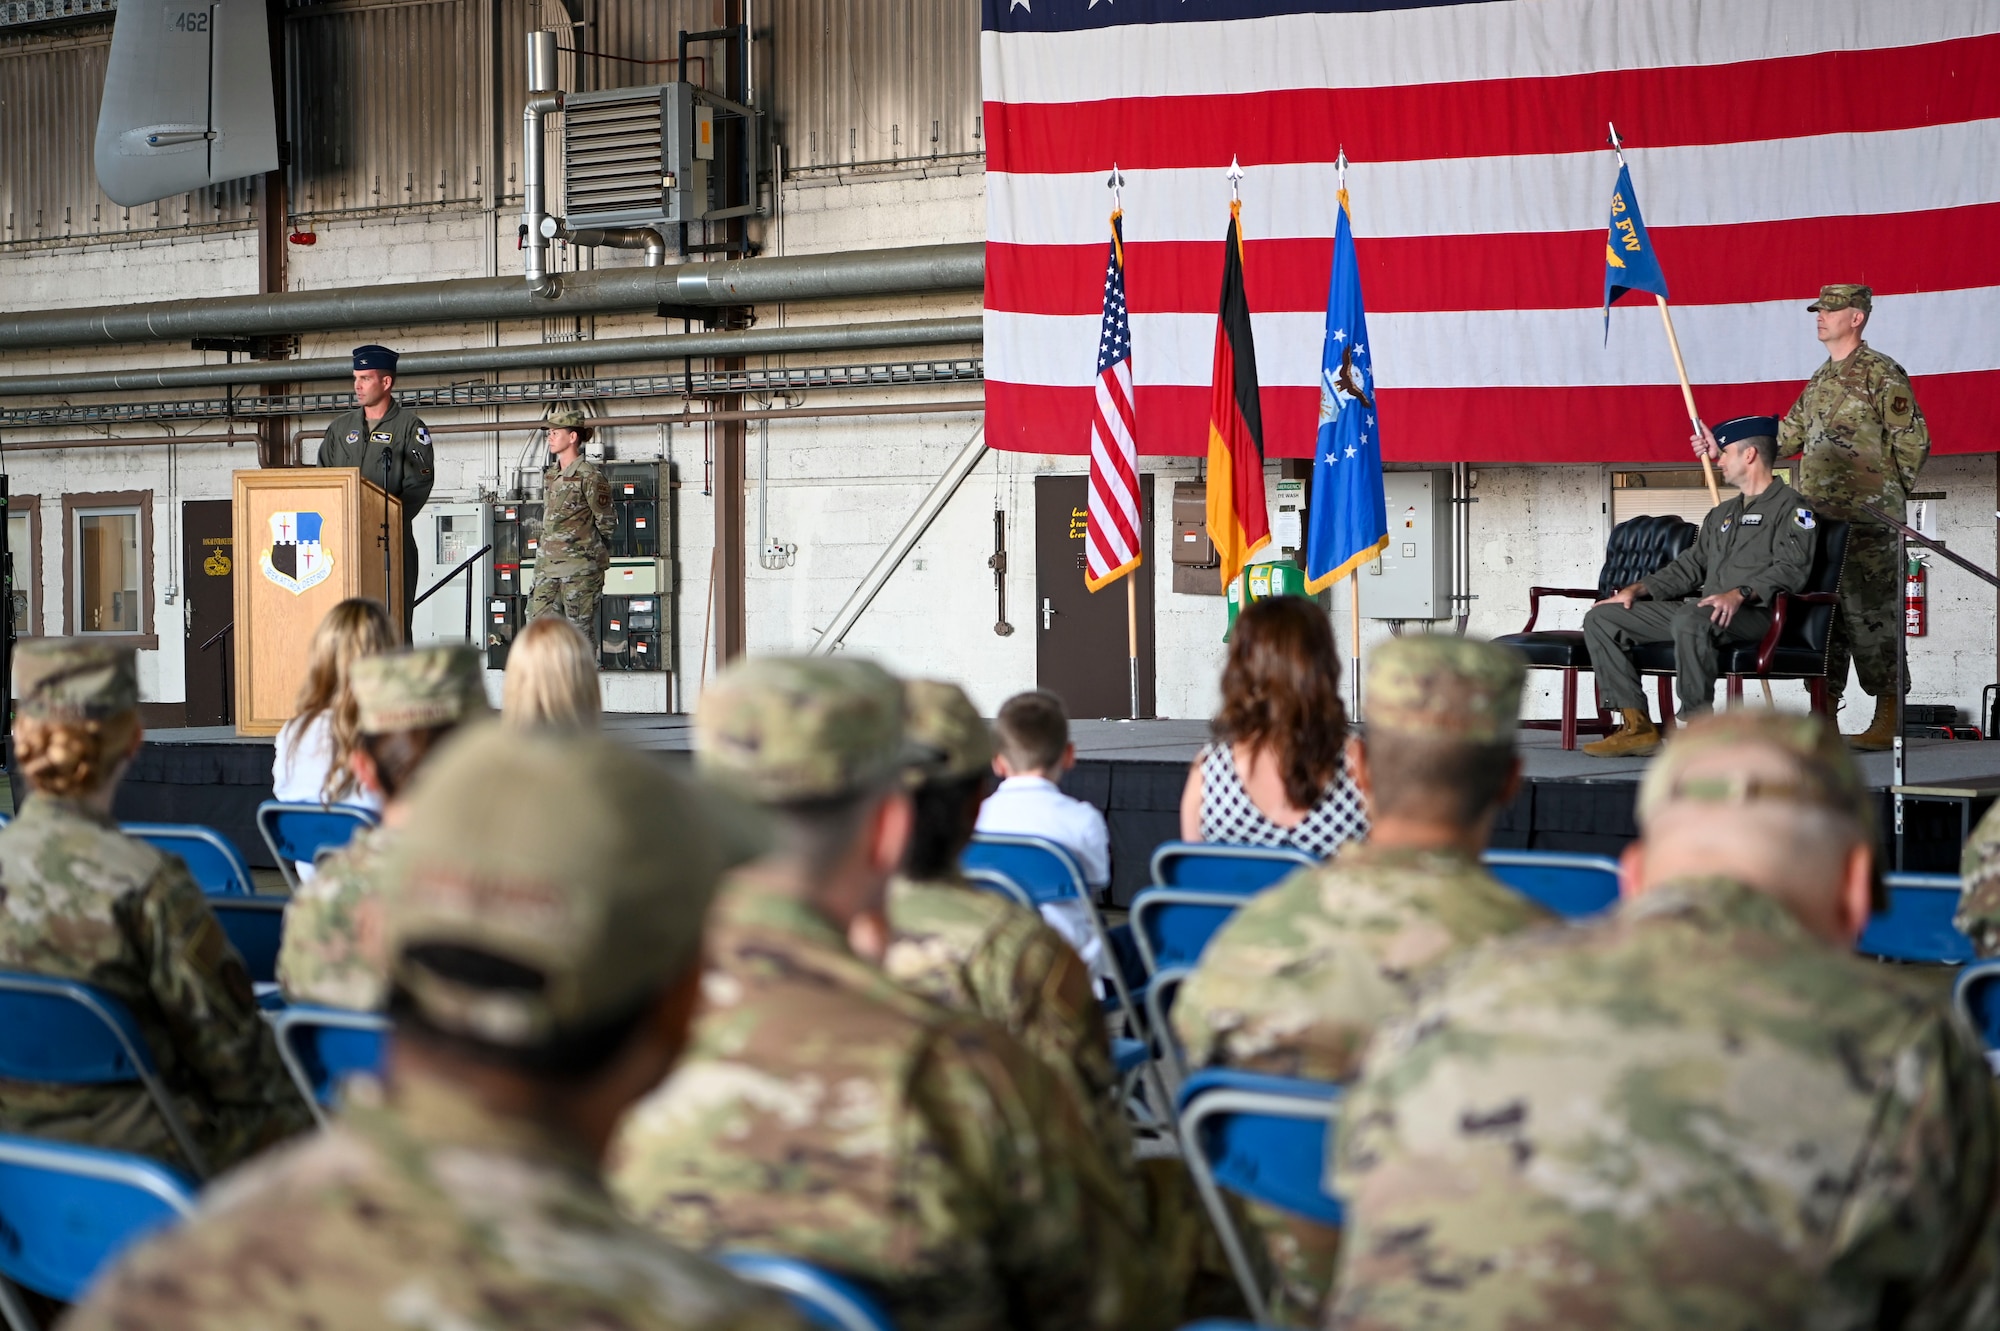 Col. Leslie Hauck, 52nd Fighter Wing commander, gives a speech during the 52nd Operations Group assumption of command ceremony, June 28, 2022, on Spangdahlem Air Base, Germany. Command of the 52nd OG was assumed by Col. Thomas Graham. (U.S. Air Force photo by Senior Airman Jessica Sanchez-Chen)